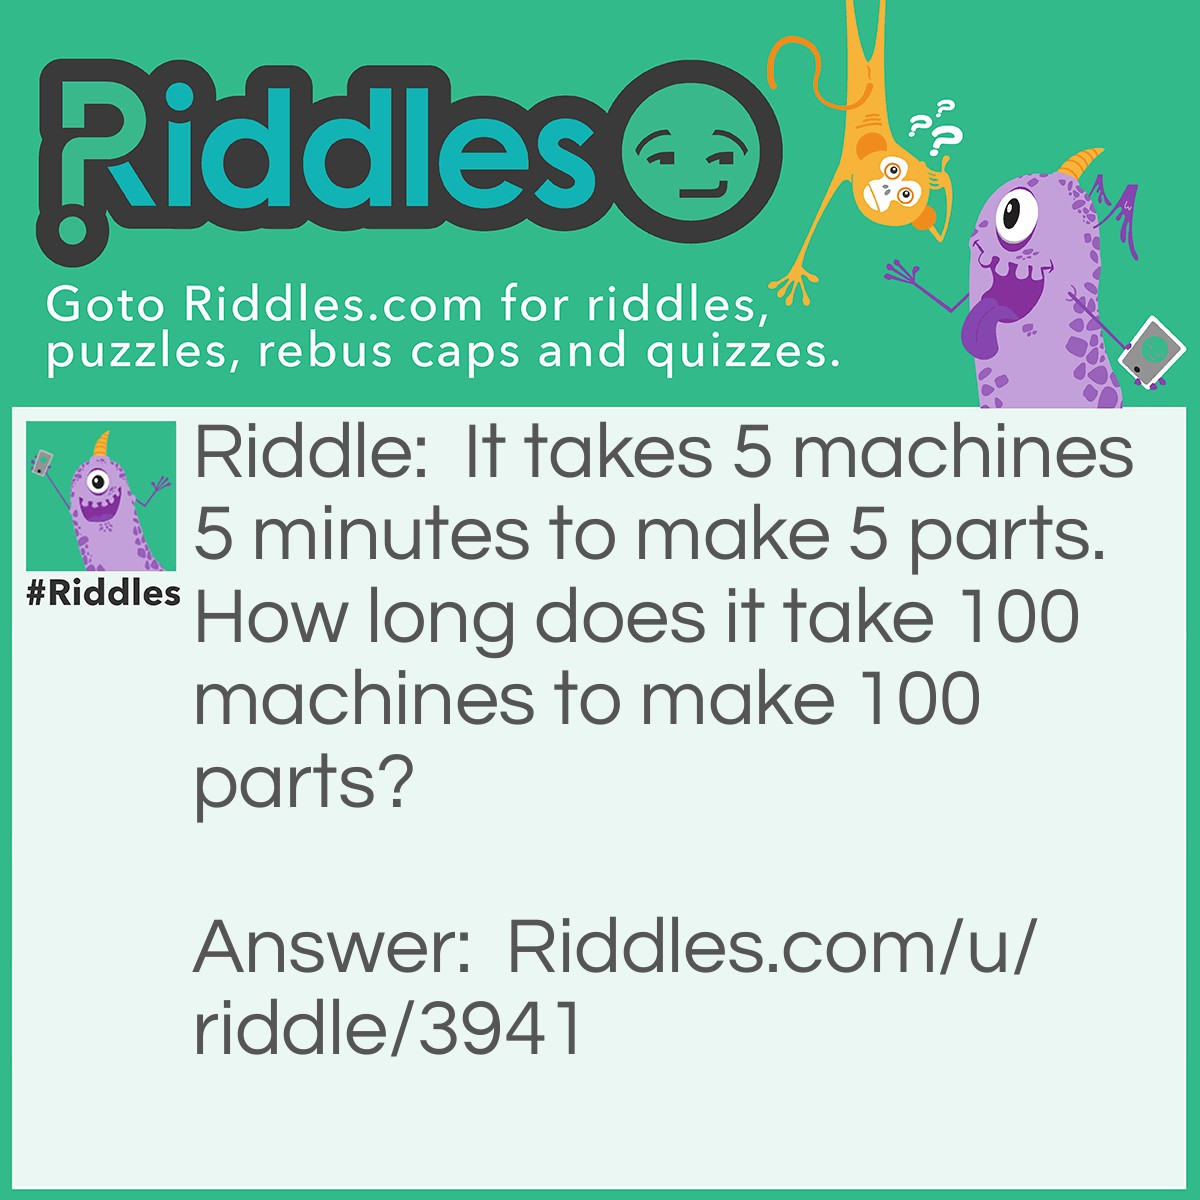 Riddle: It takes 5 machines 5 minutes to make 5 parts. How long does it take 100 machines to make 100 parts? Answer: 5 minutes.